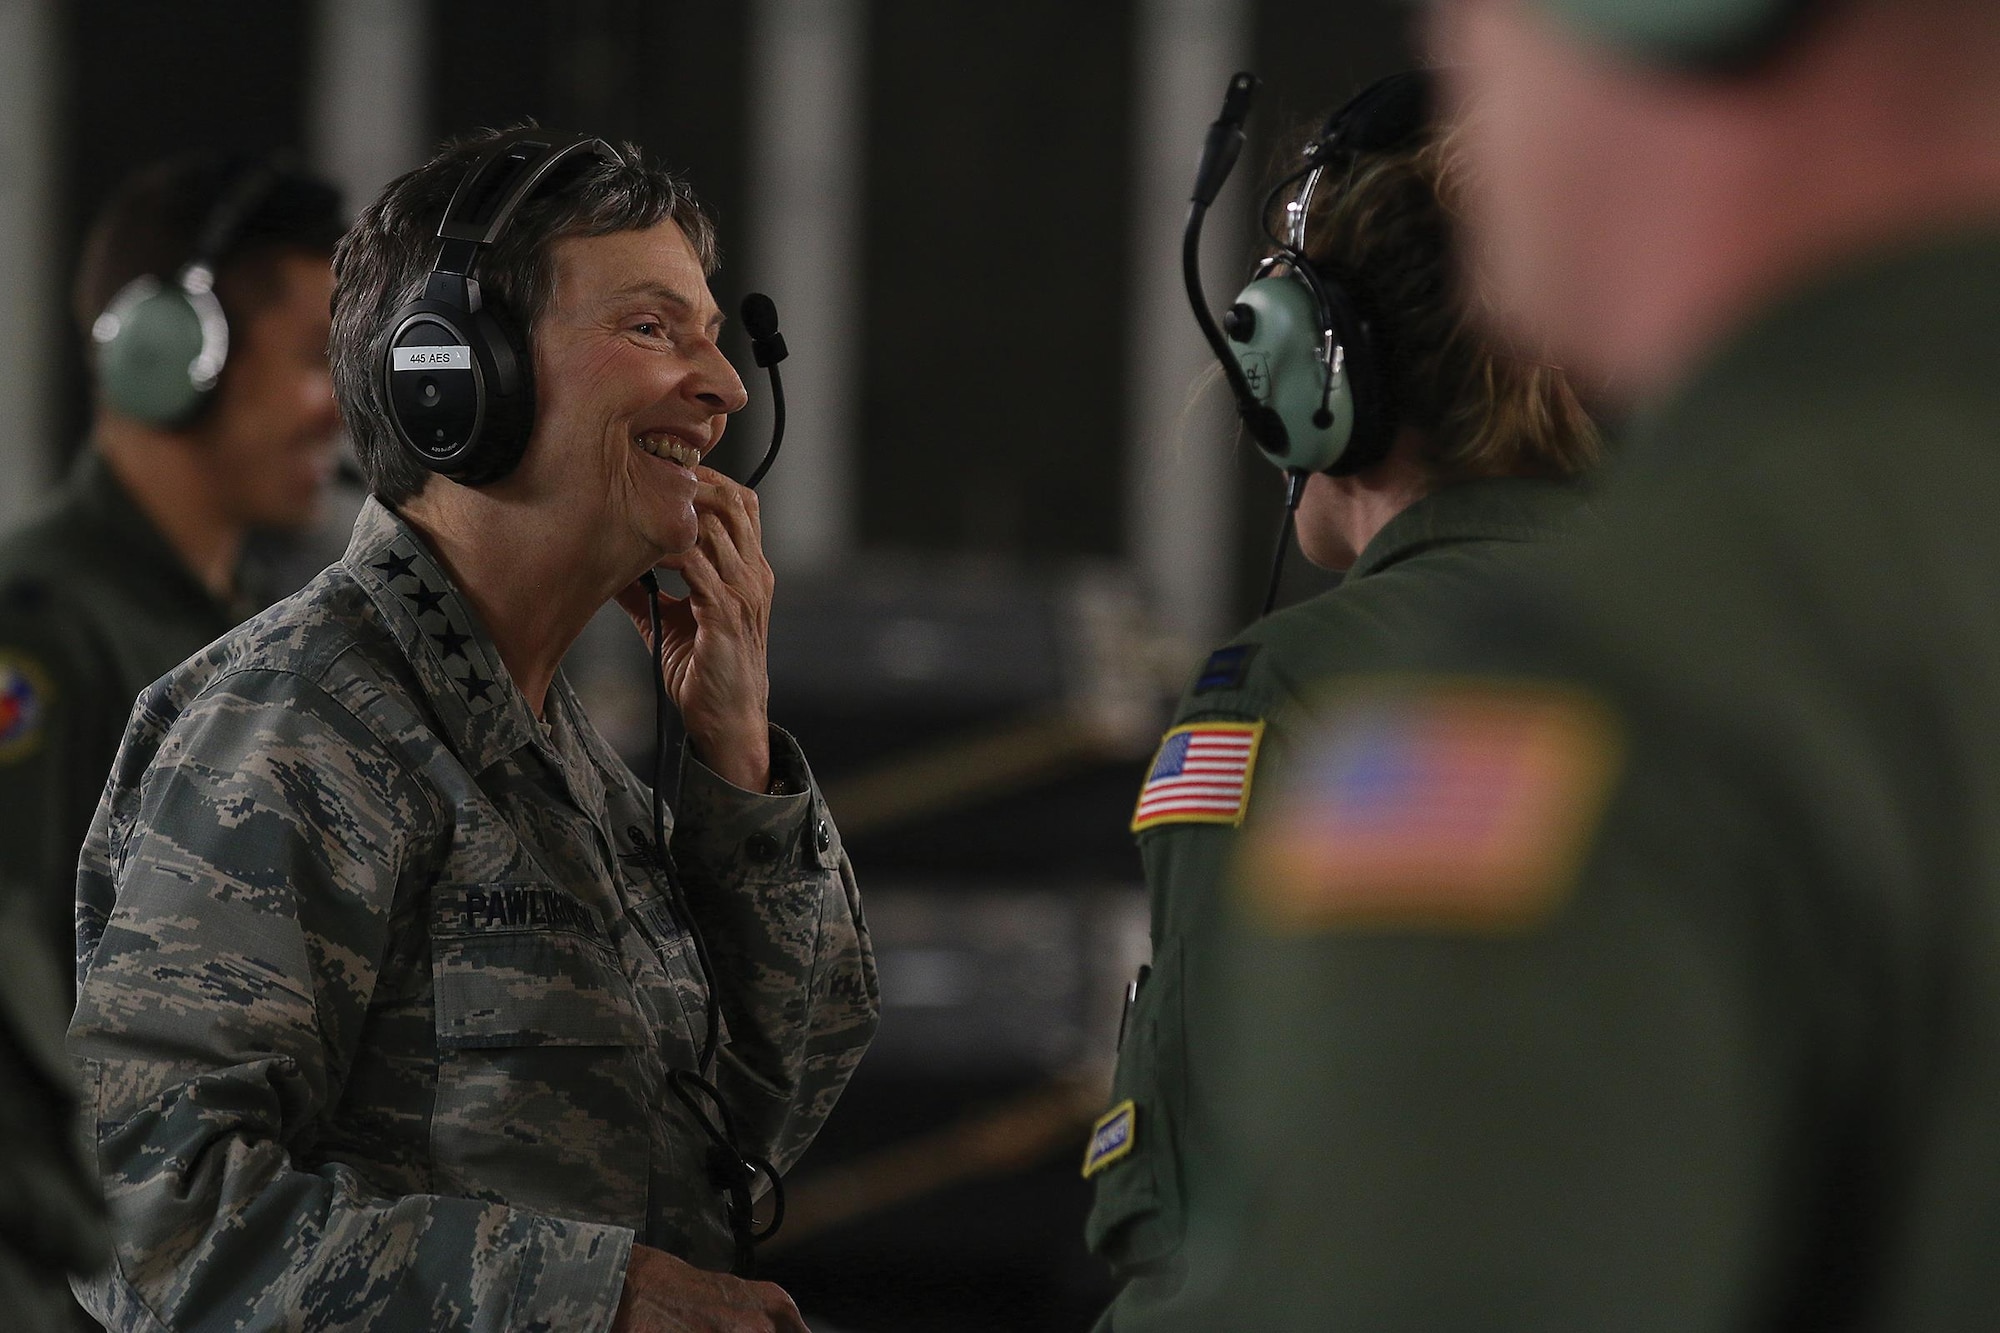 Gen. Ellen Pawlikowski, Commander, Air Force Materiel Command, visits with 445th Aeromedical Evacuation Squadron Airmen during an AE training flight onboard a 445th Airlift Wing C-17 Globemaster III June 20, 2017. The general was shown the various equipment used by AES and saw the Airmen perform various medical emergency scenarios. (U.S. Air Force photo/Tech. Sgt. Patrick O’Reilly)